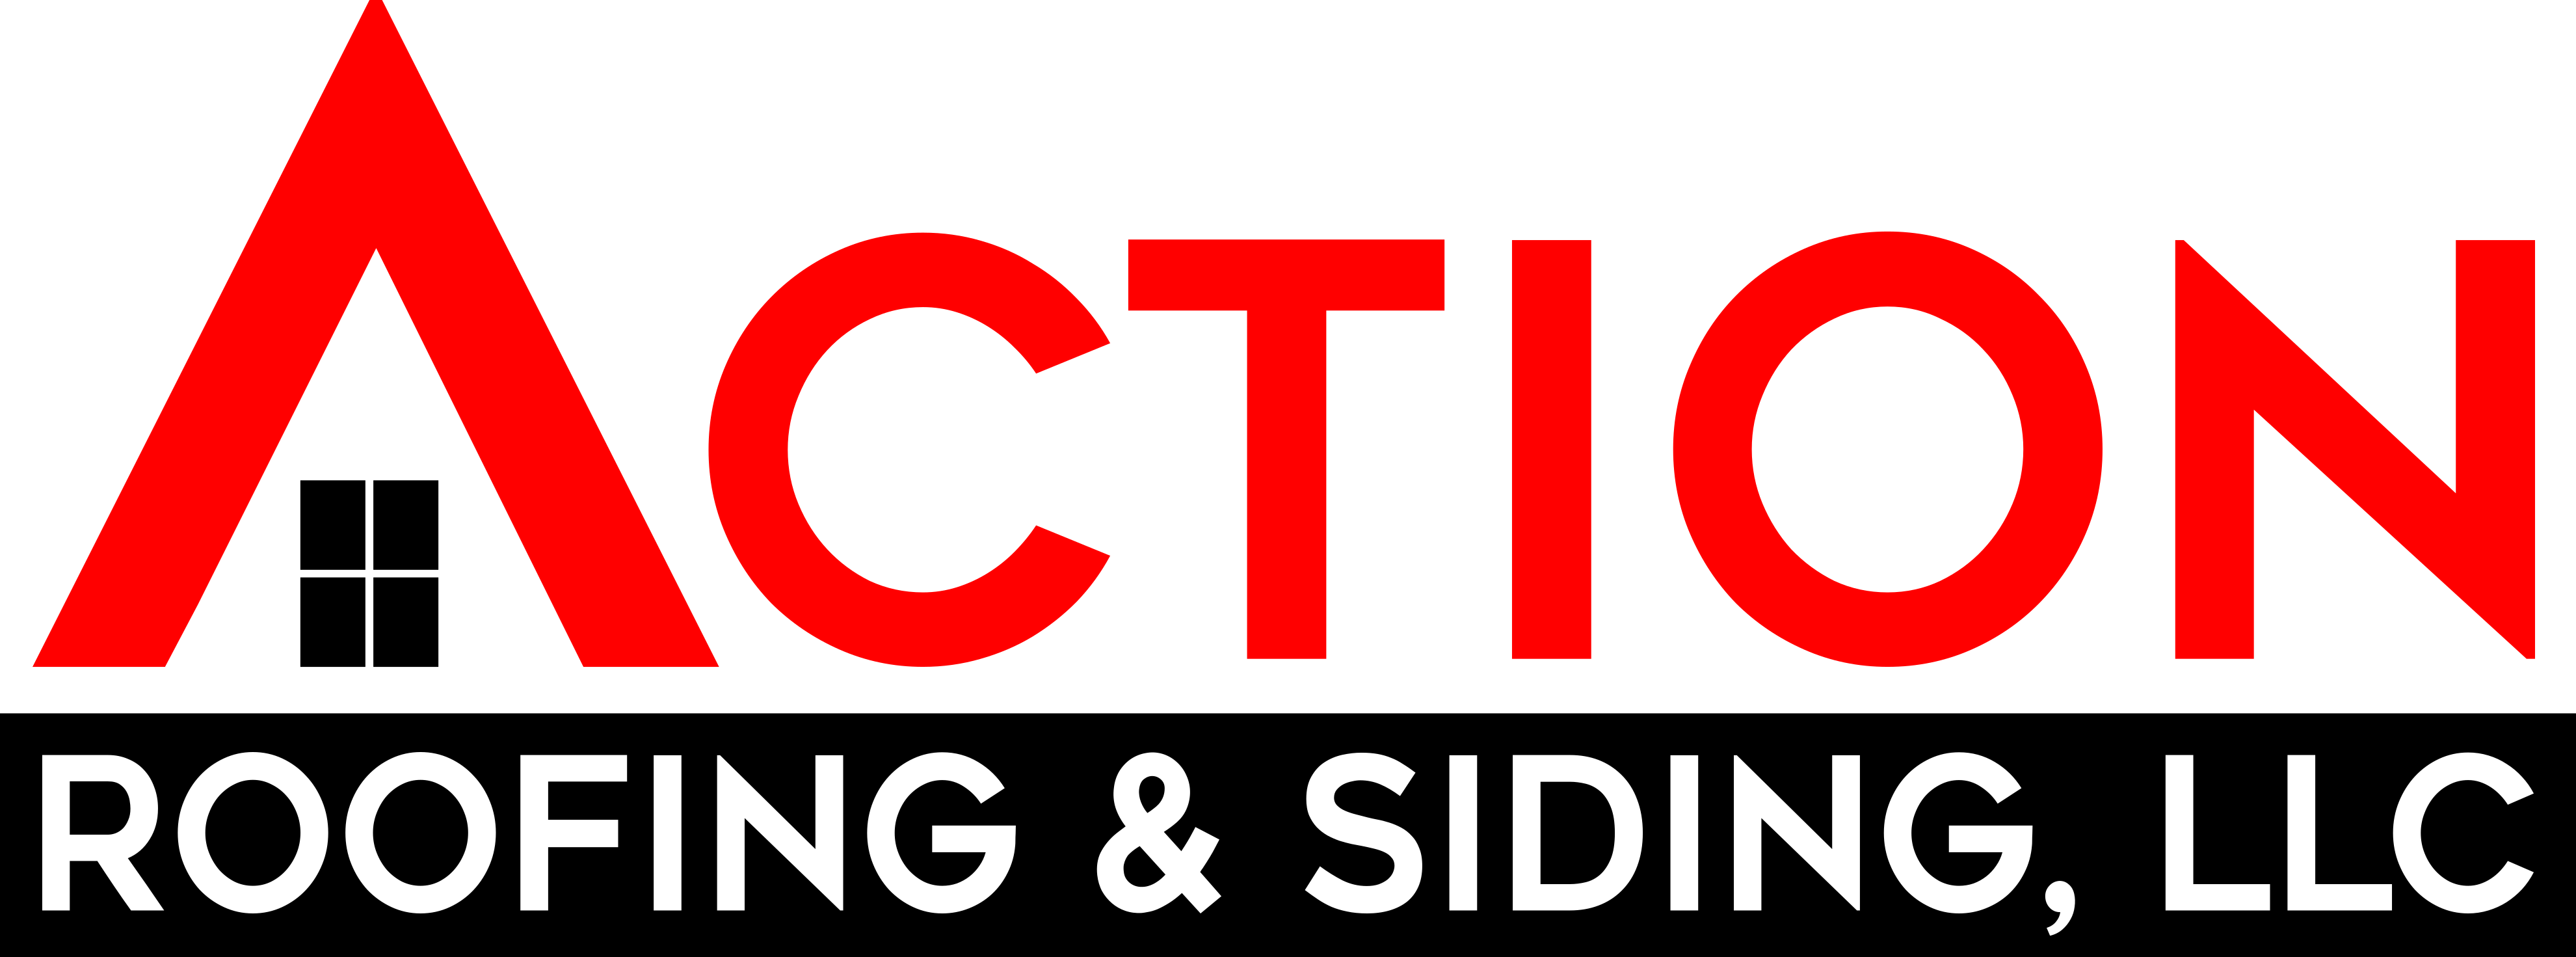 Action Roofing